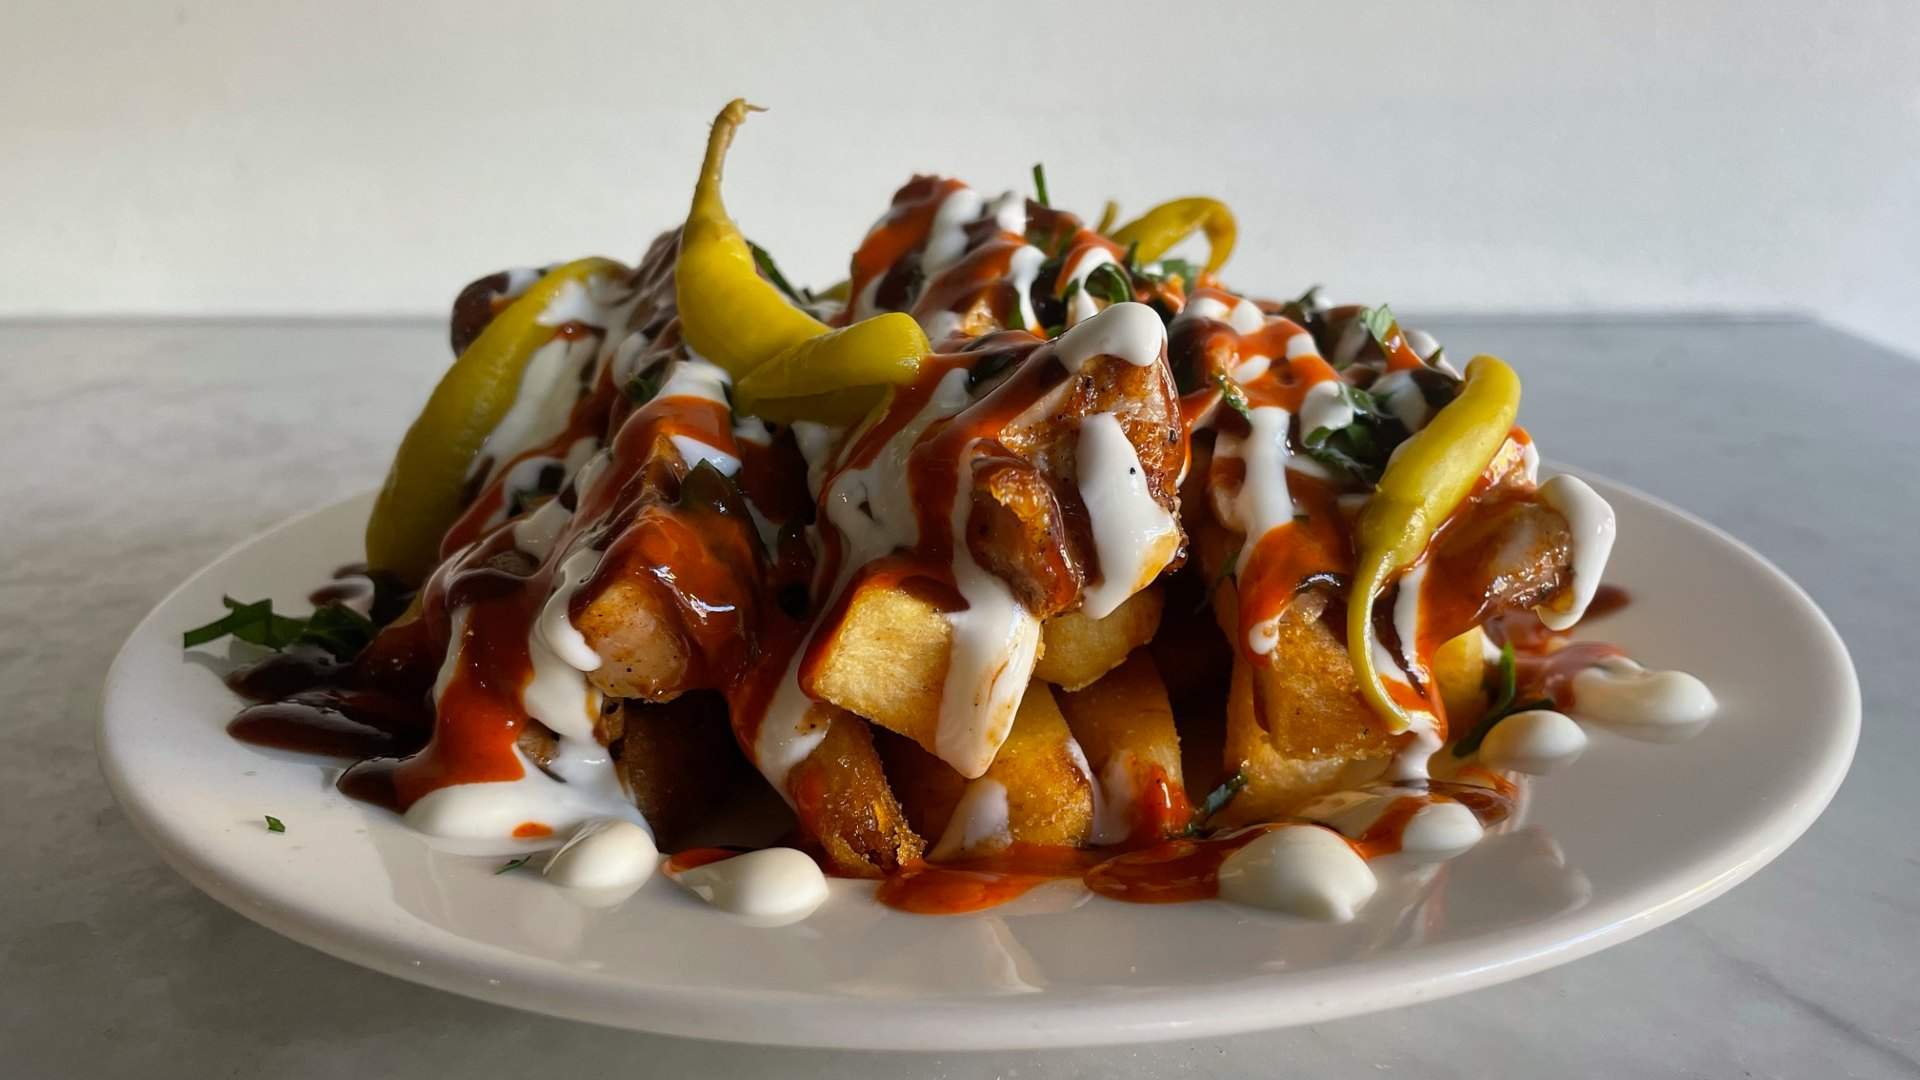 Stanbuli Has Added a Next-Level Halal Snack Pack to Its New Takeaway Banquet Menu